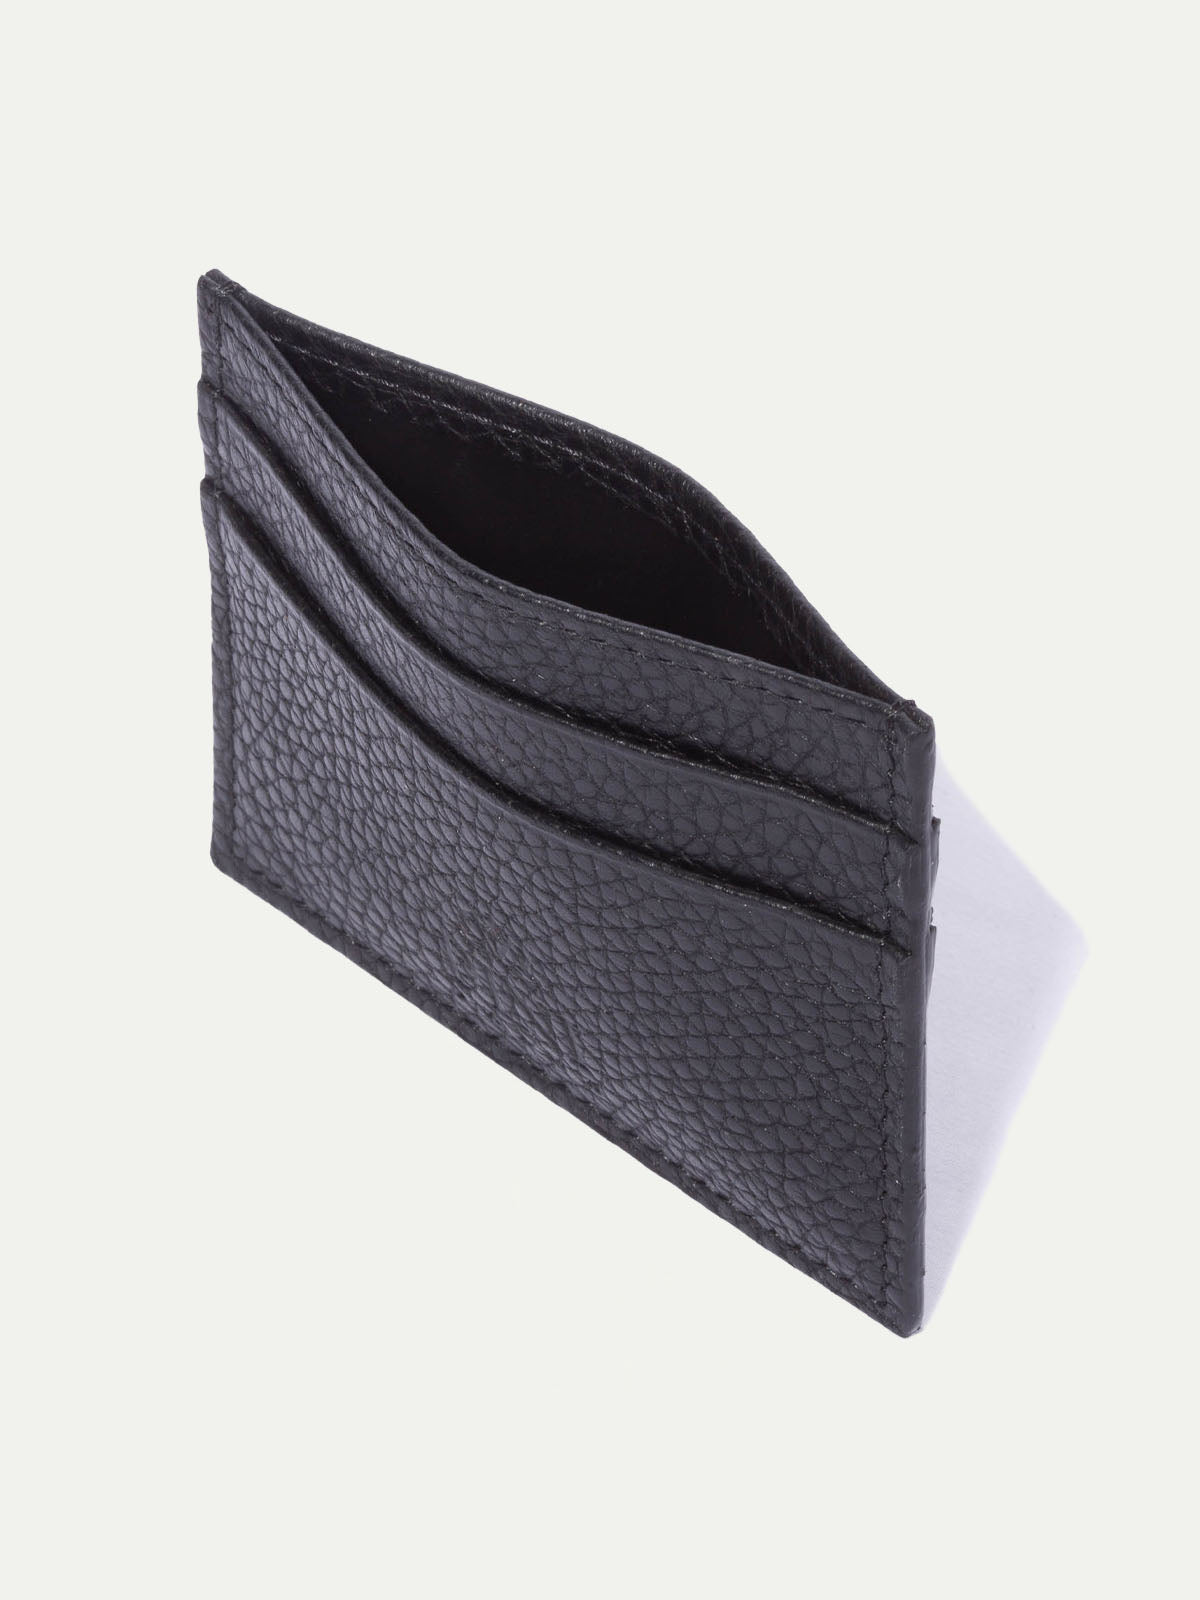 Black leather card holder - Made in Italy